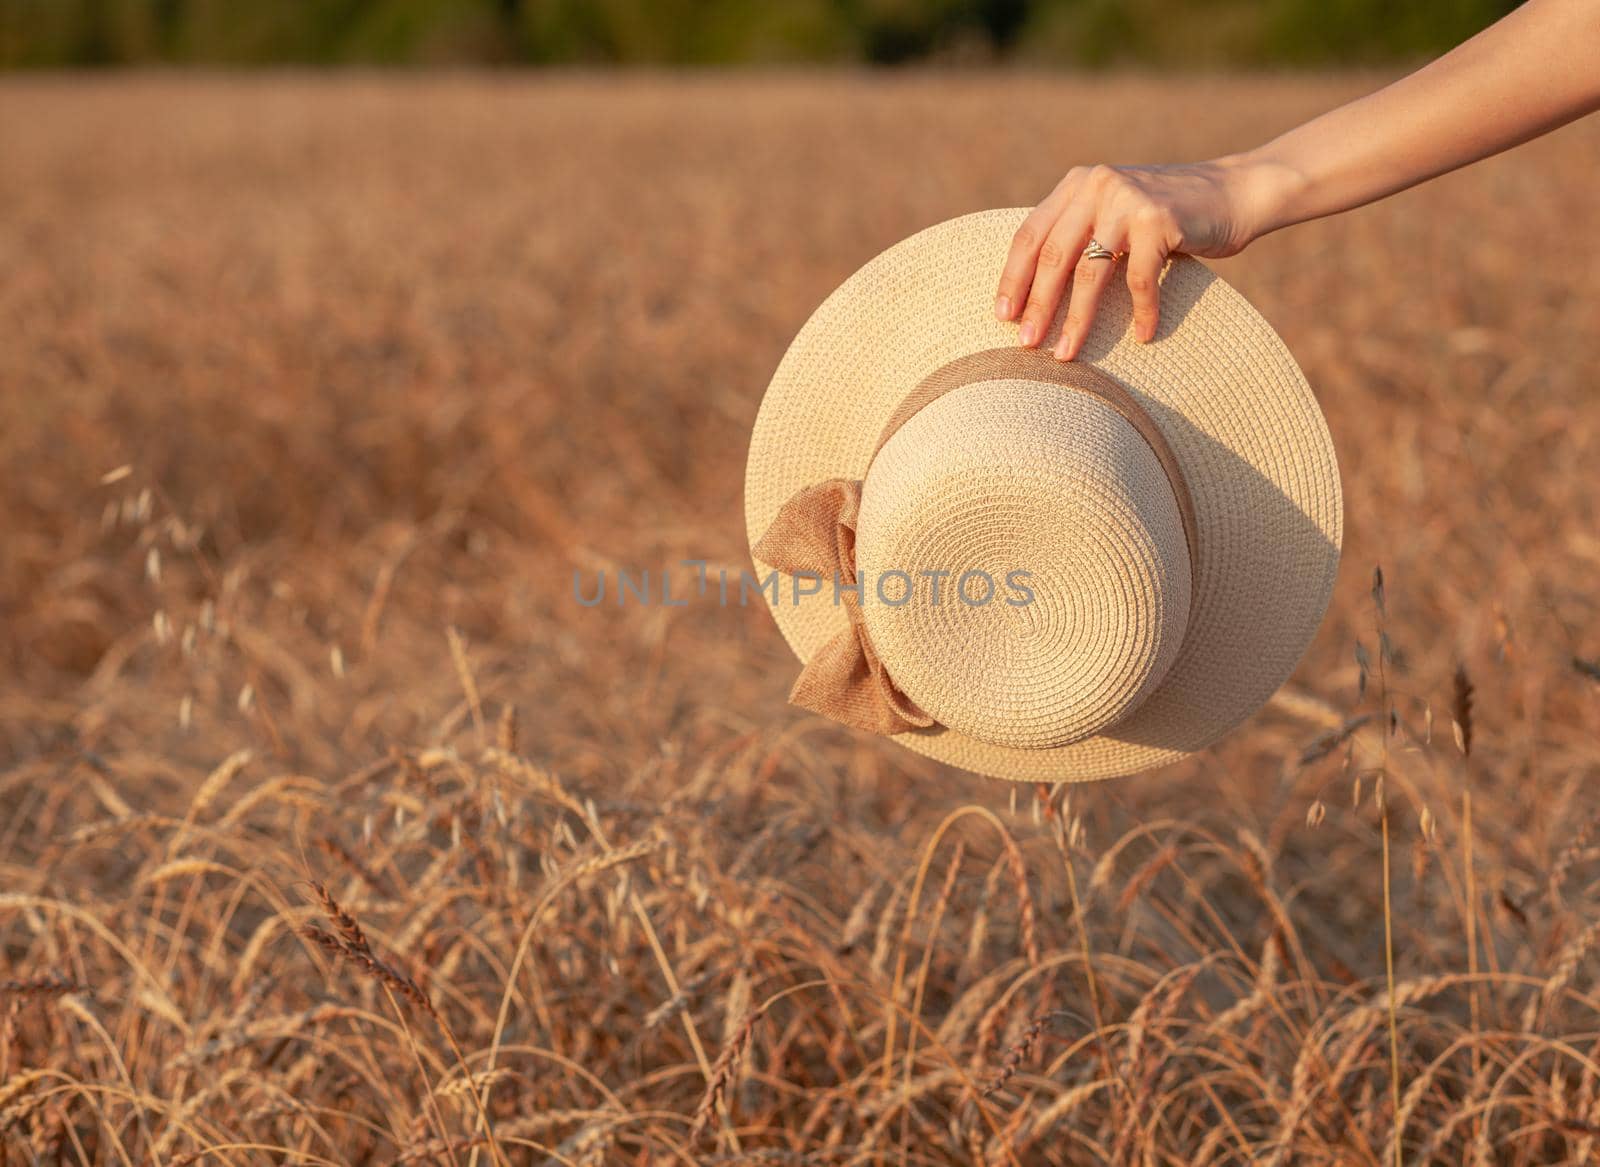 Young beautiful girl with long curly hair poses in a wheat field in the summer at sunset. A girl holds a hat in her hand against the background of a wheat field. The view from the back. Toning.